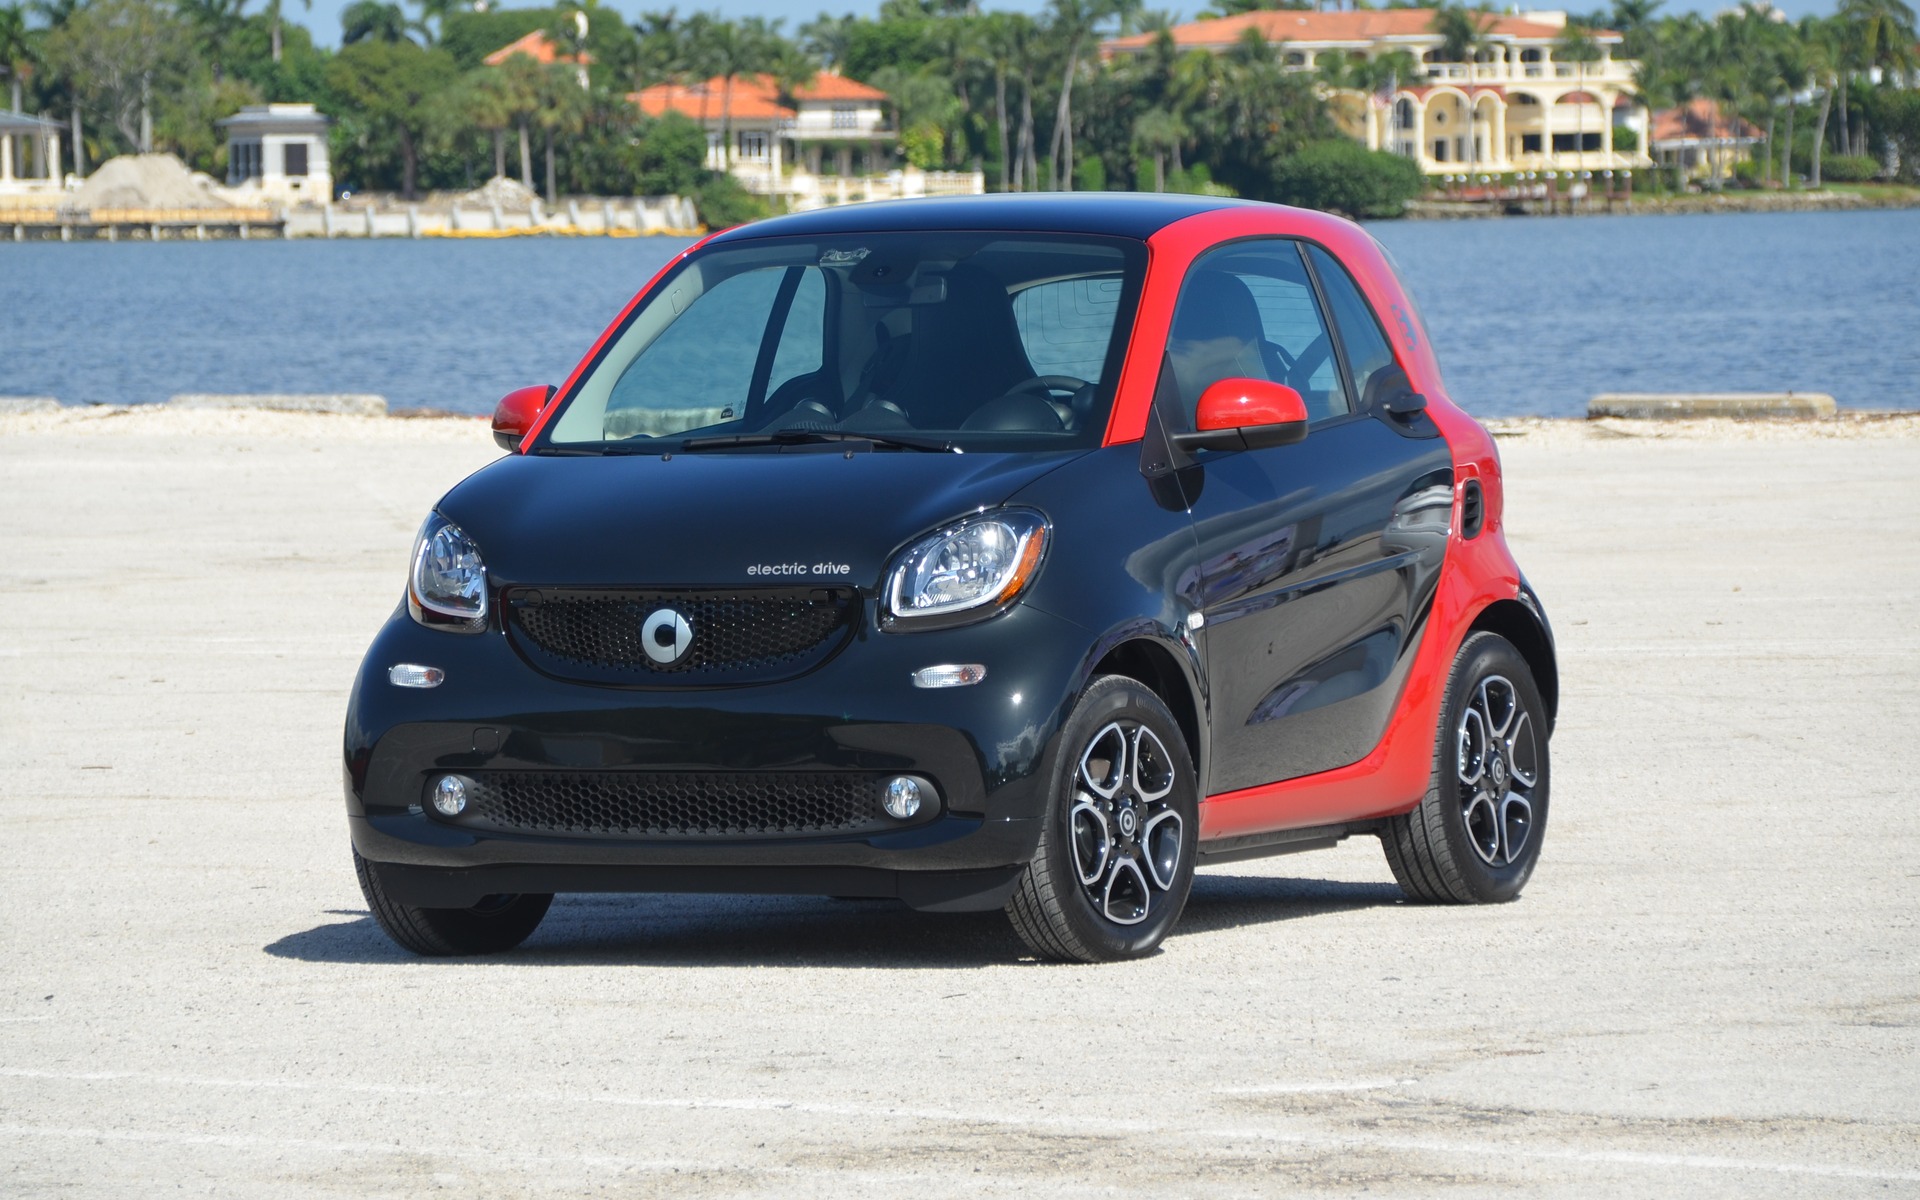 2017 Smart ForTwo Electric Drive: first drive of electric two-seat car